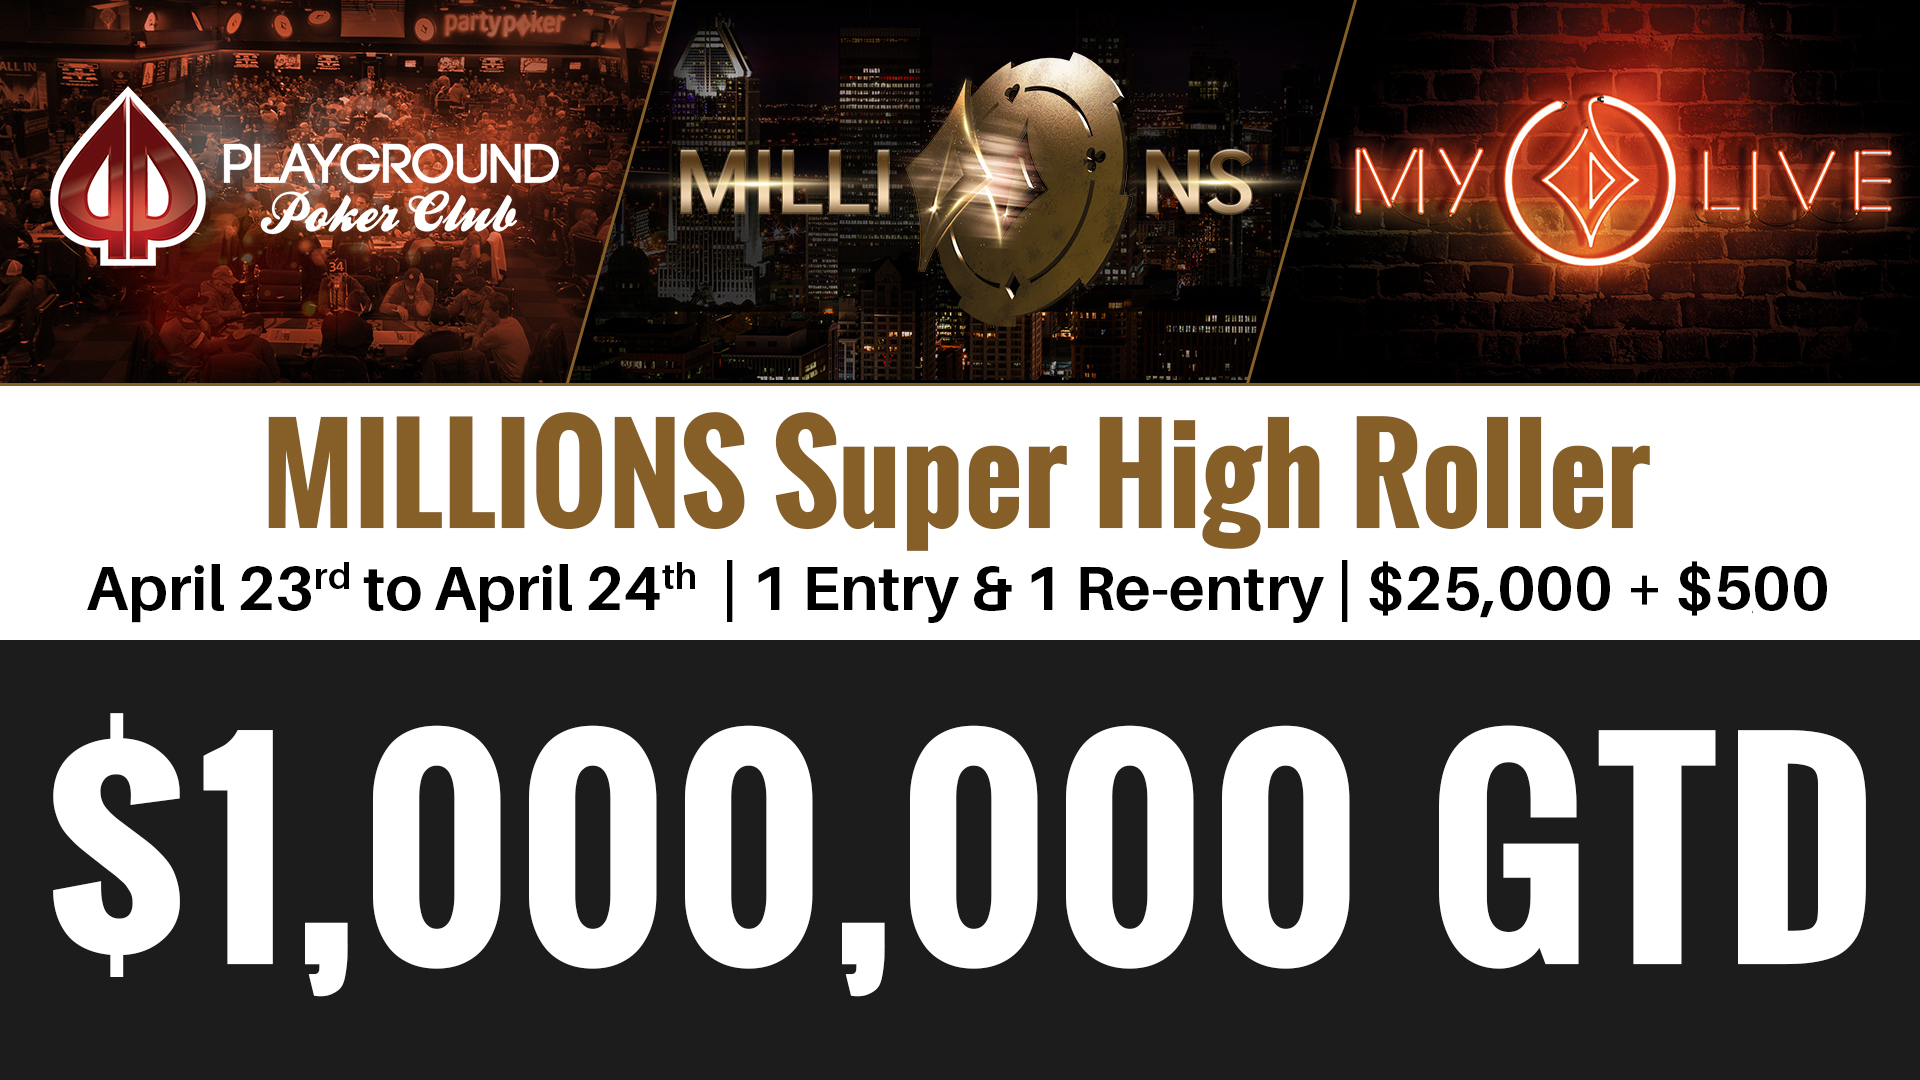 Starting today – Event #3, the Super High Roller